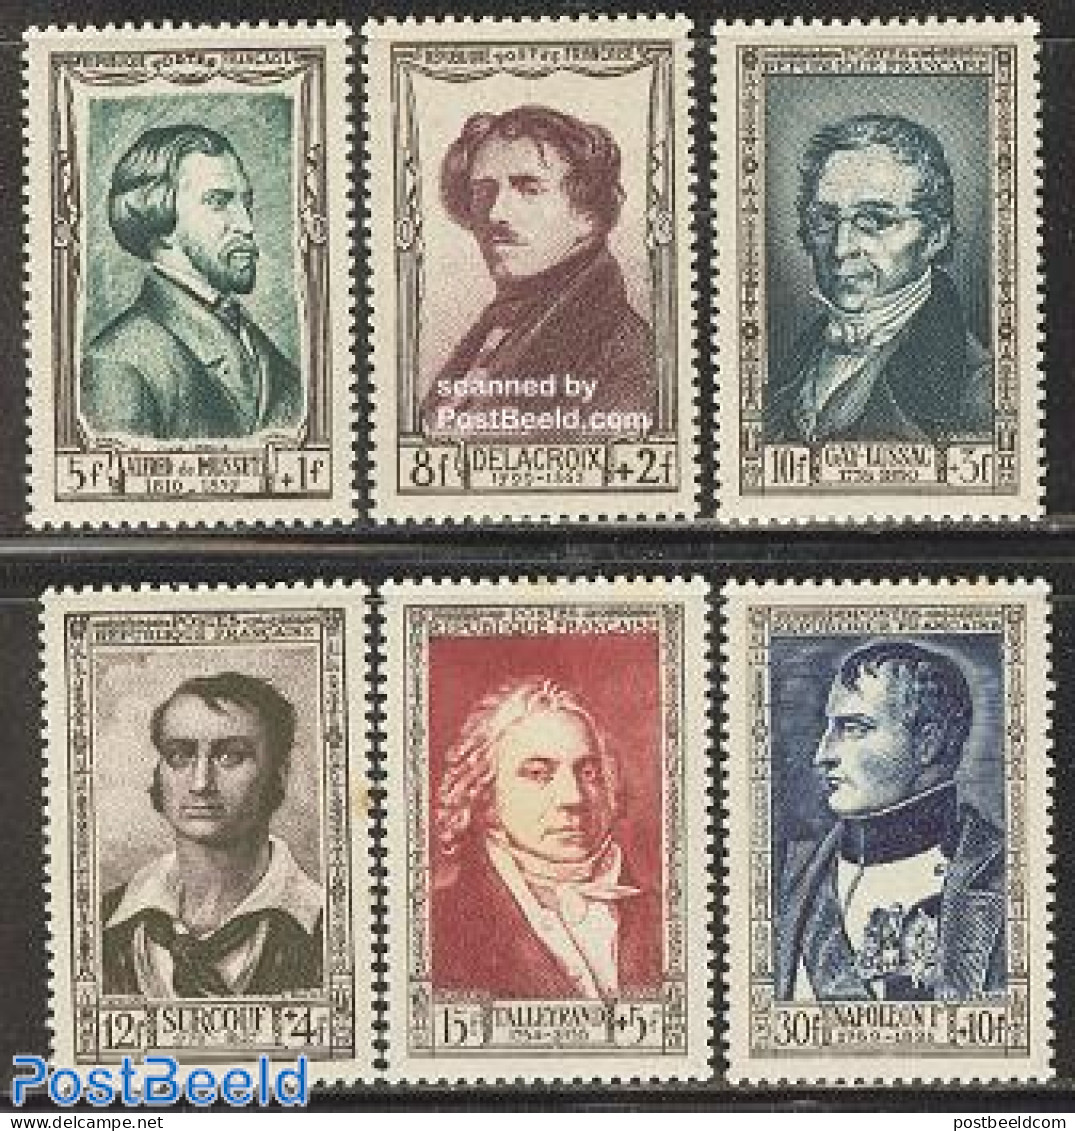 France 1951 Famous Persons 6v, Unused (hinged), History - Science - Europa Hang-on Issues - Napoleon - Politicians - C.. - Neufs